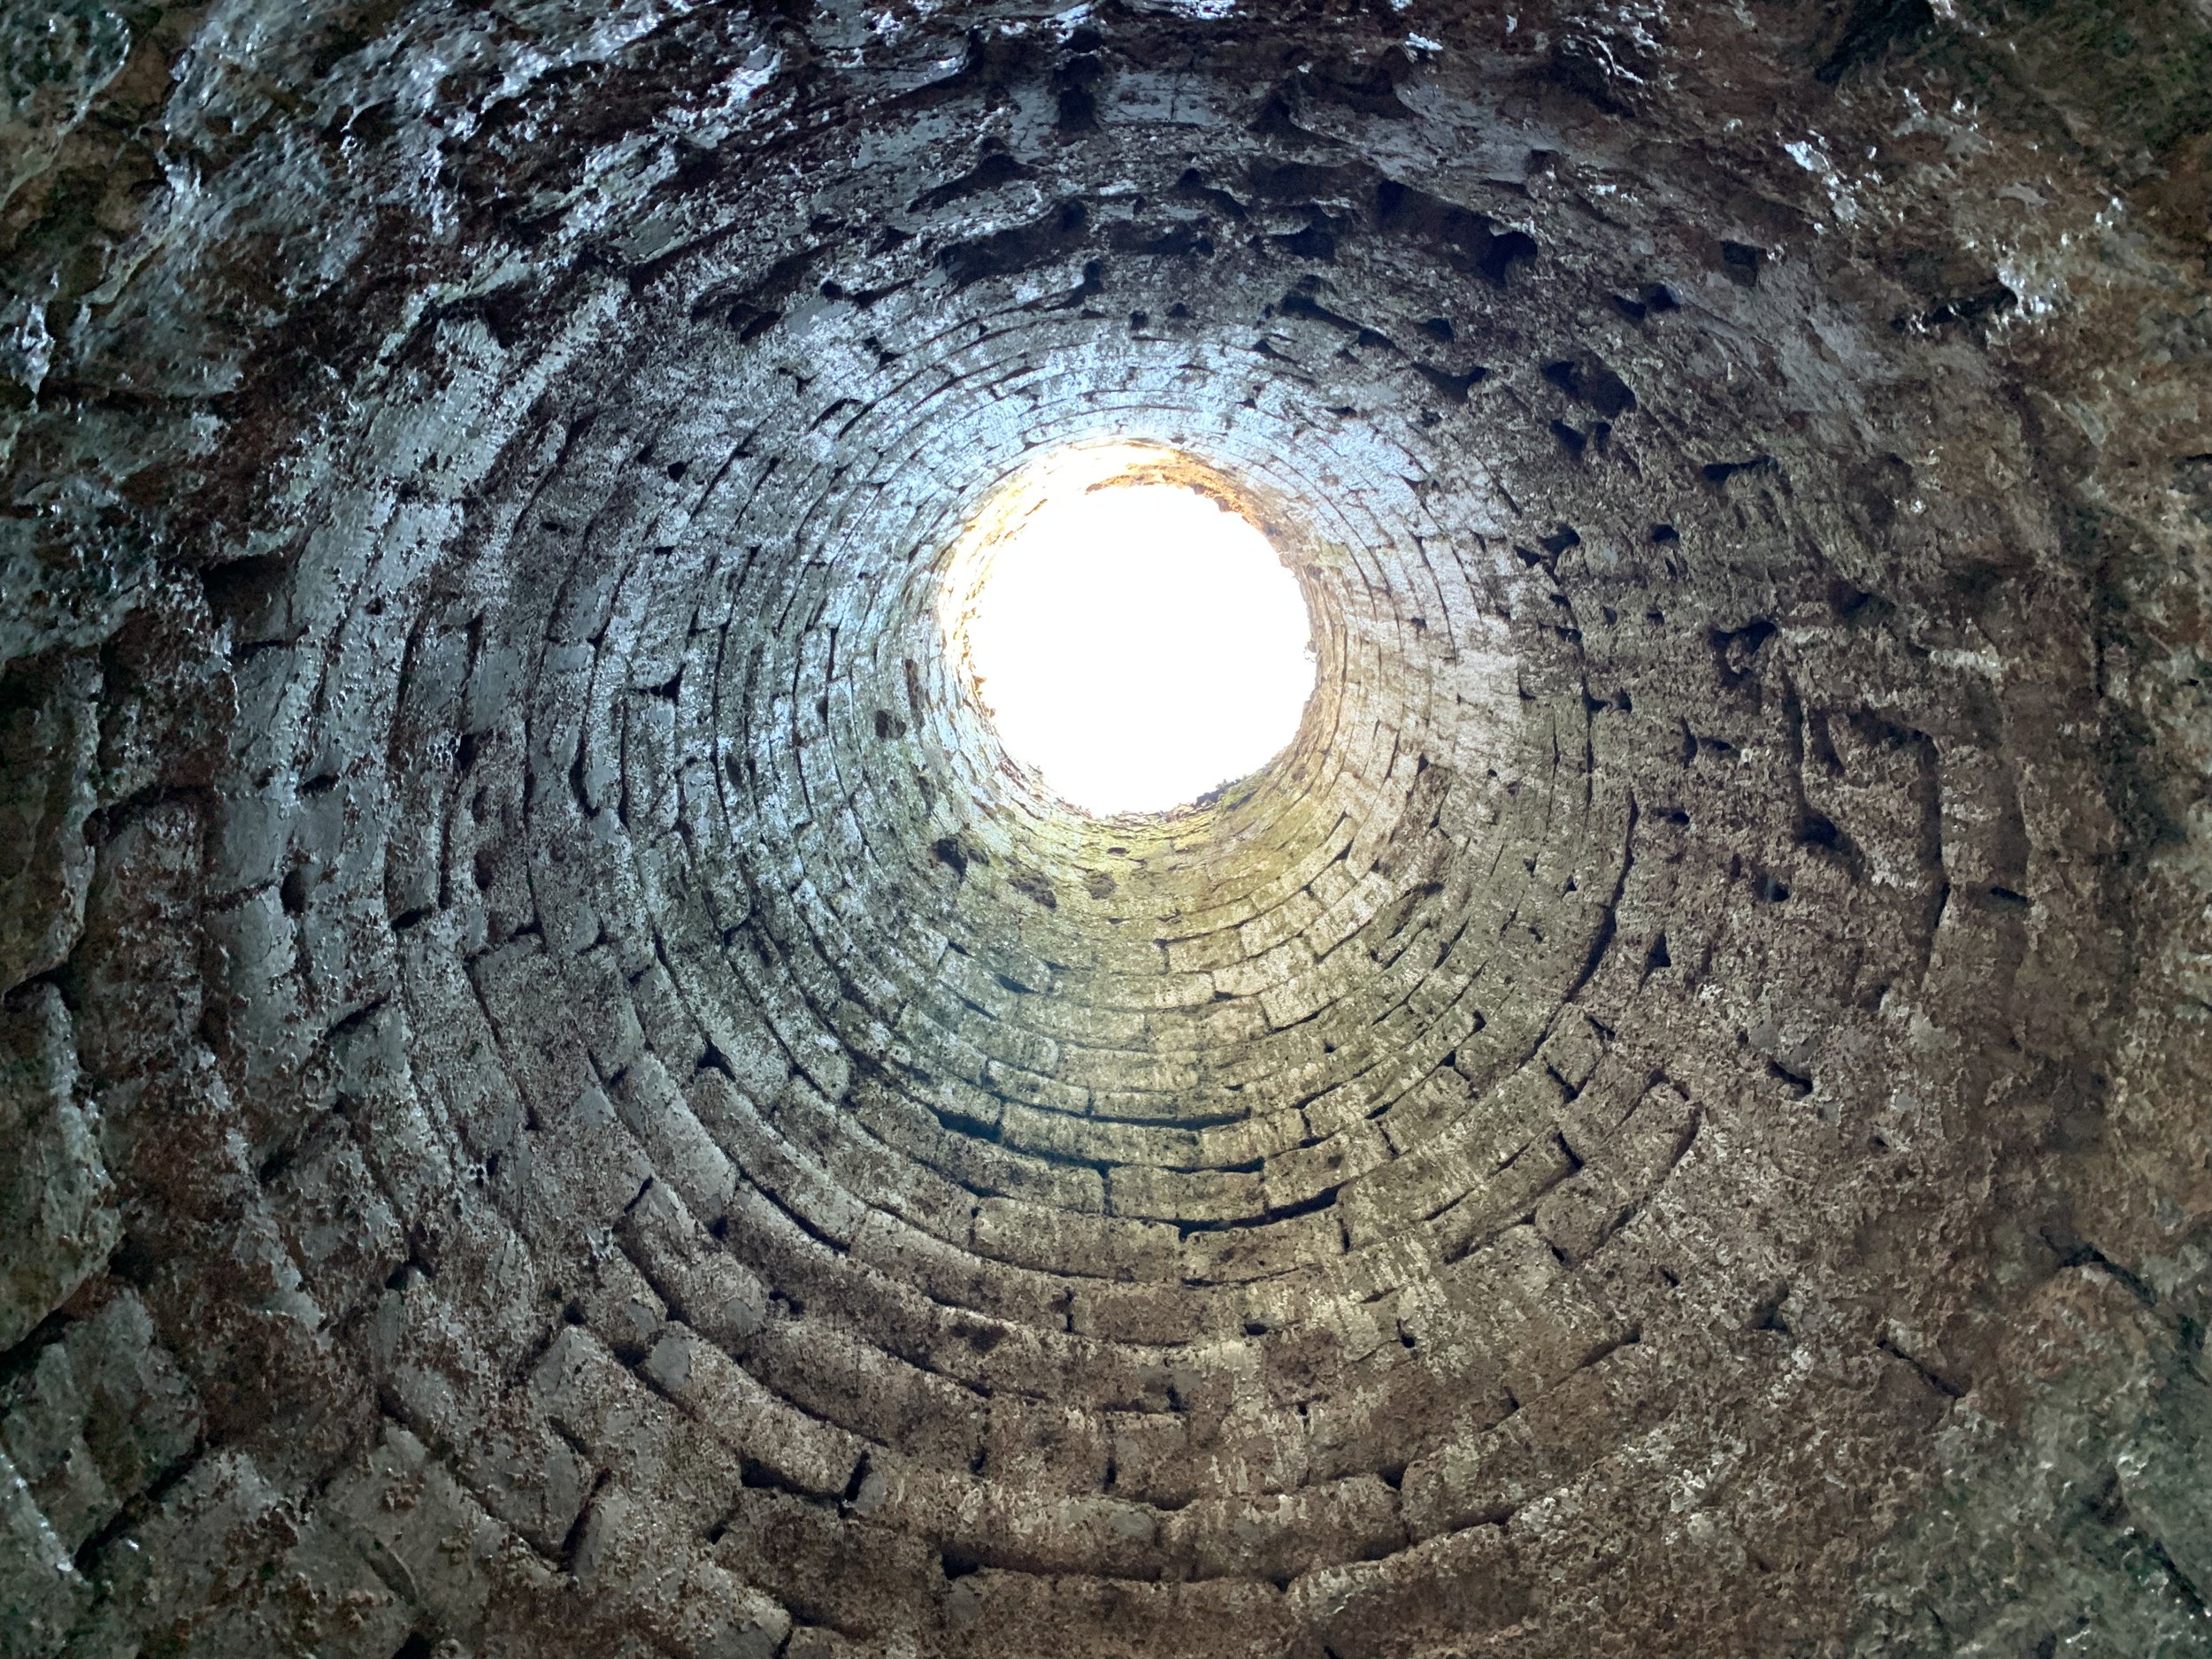 Inside the furnace, looking up through the smoke stack